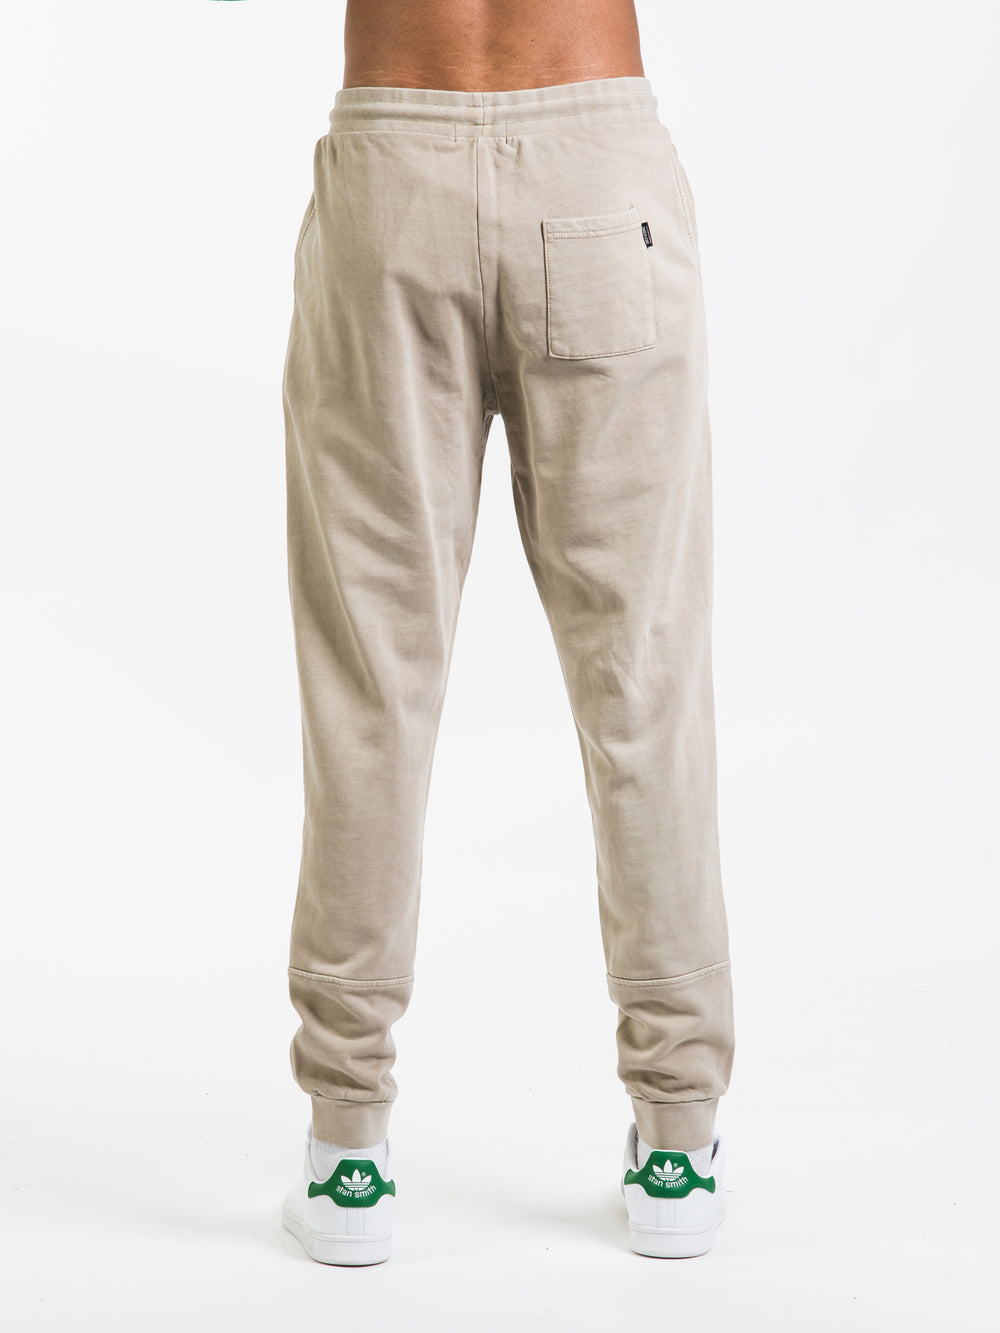 ONLY ODEL SWEATPANT  - CLEARANCE